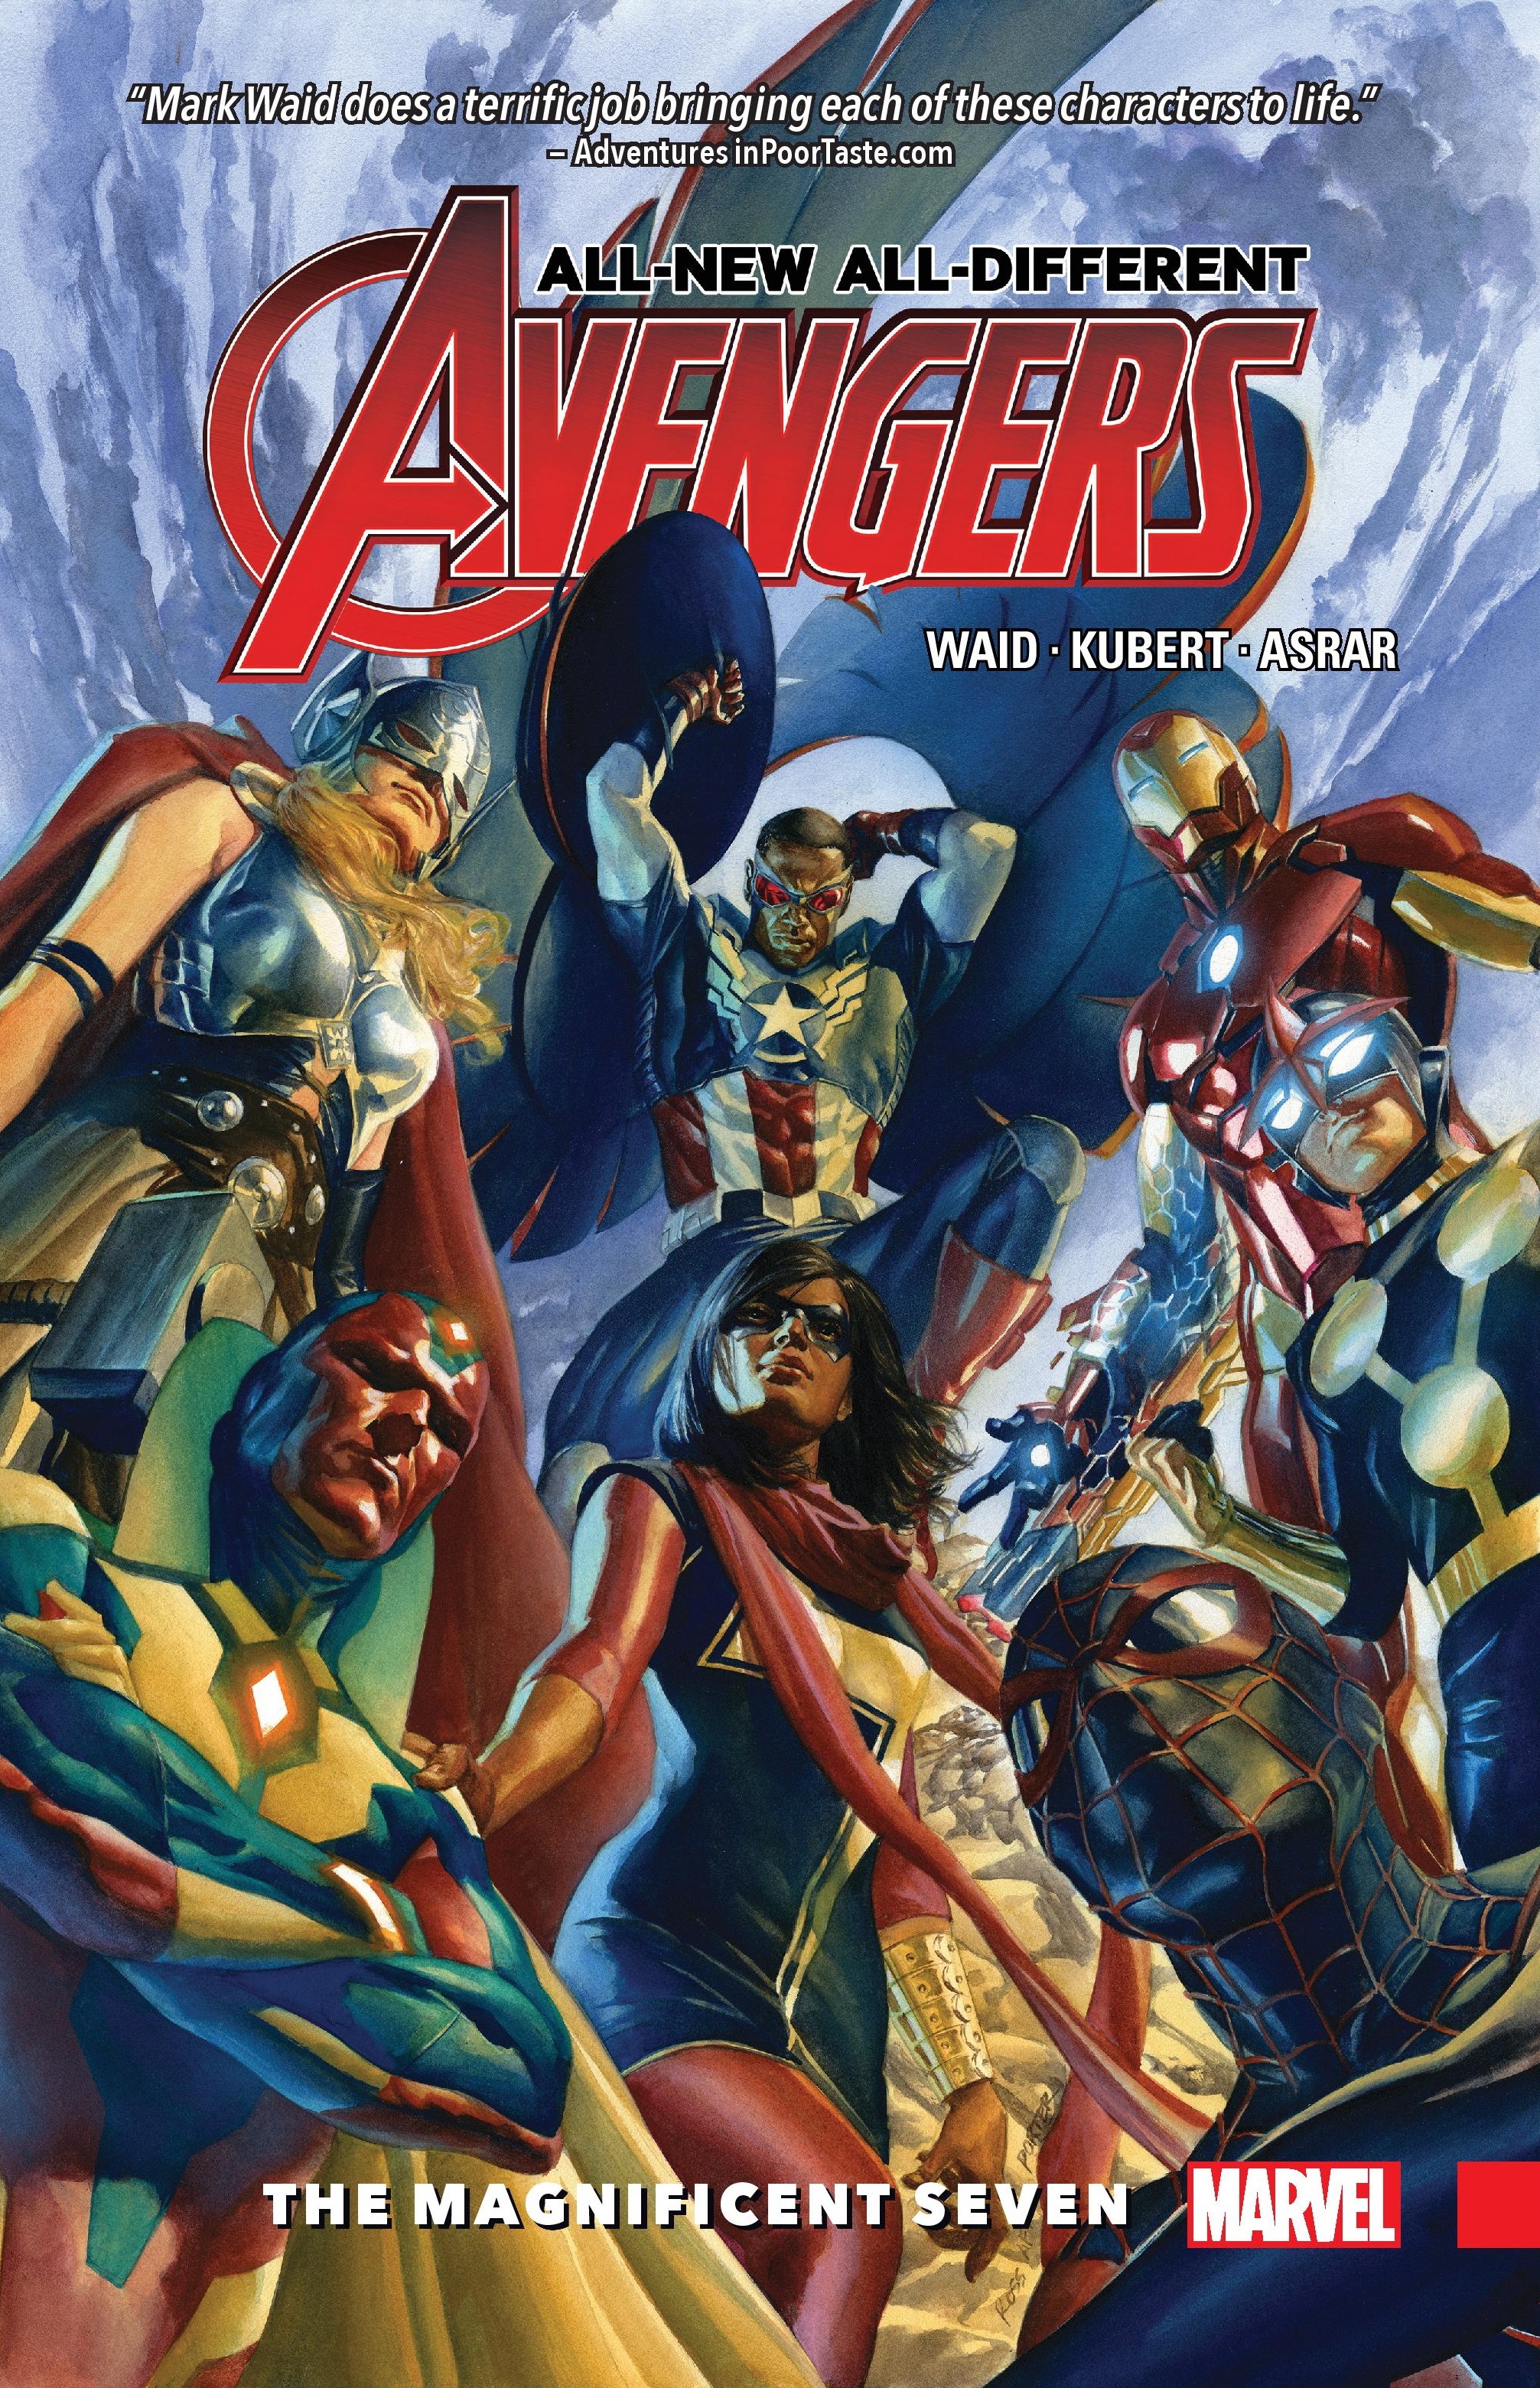 All-New, All-Different Avengers Vol. 1: The Magnificent Seven (Trade Paperback)